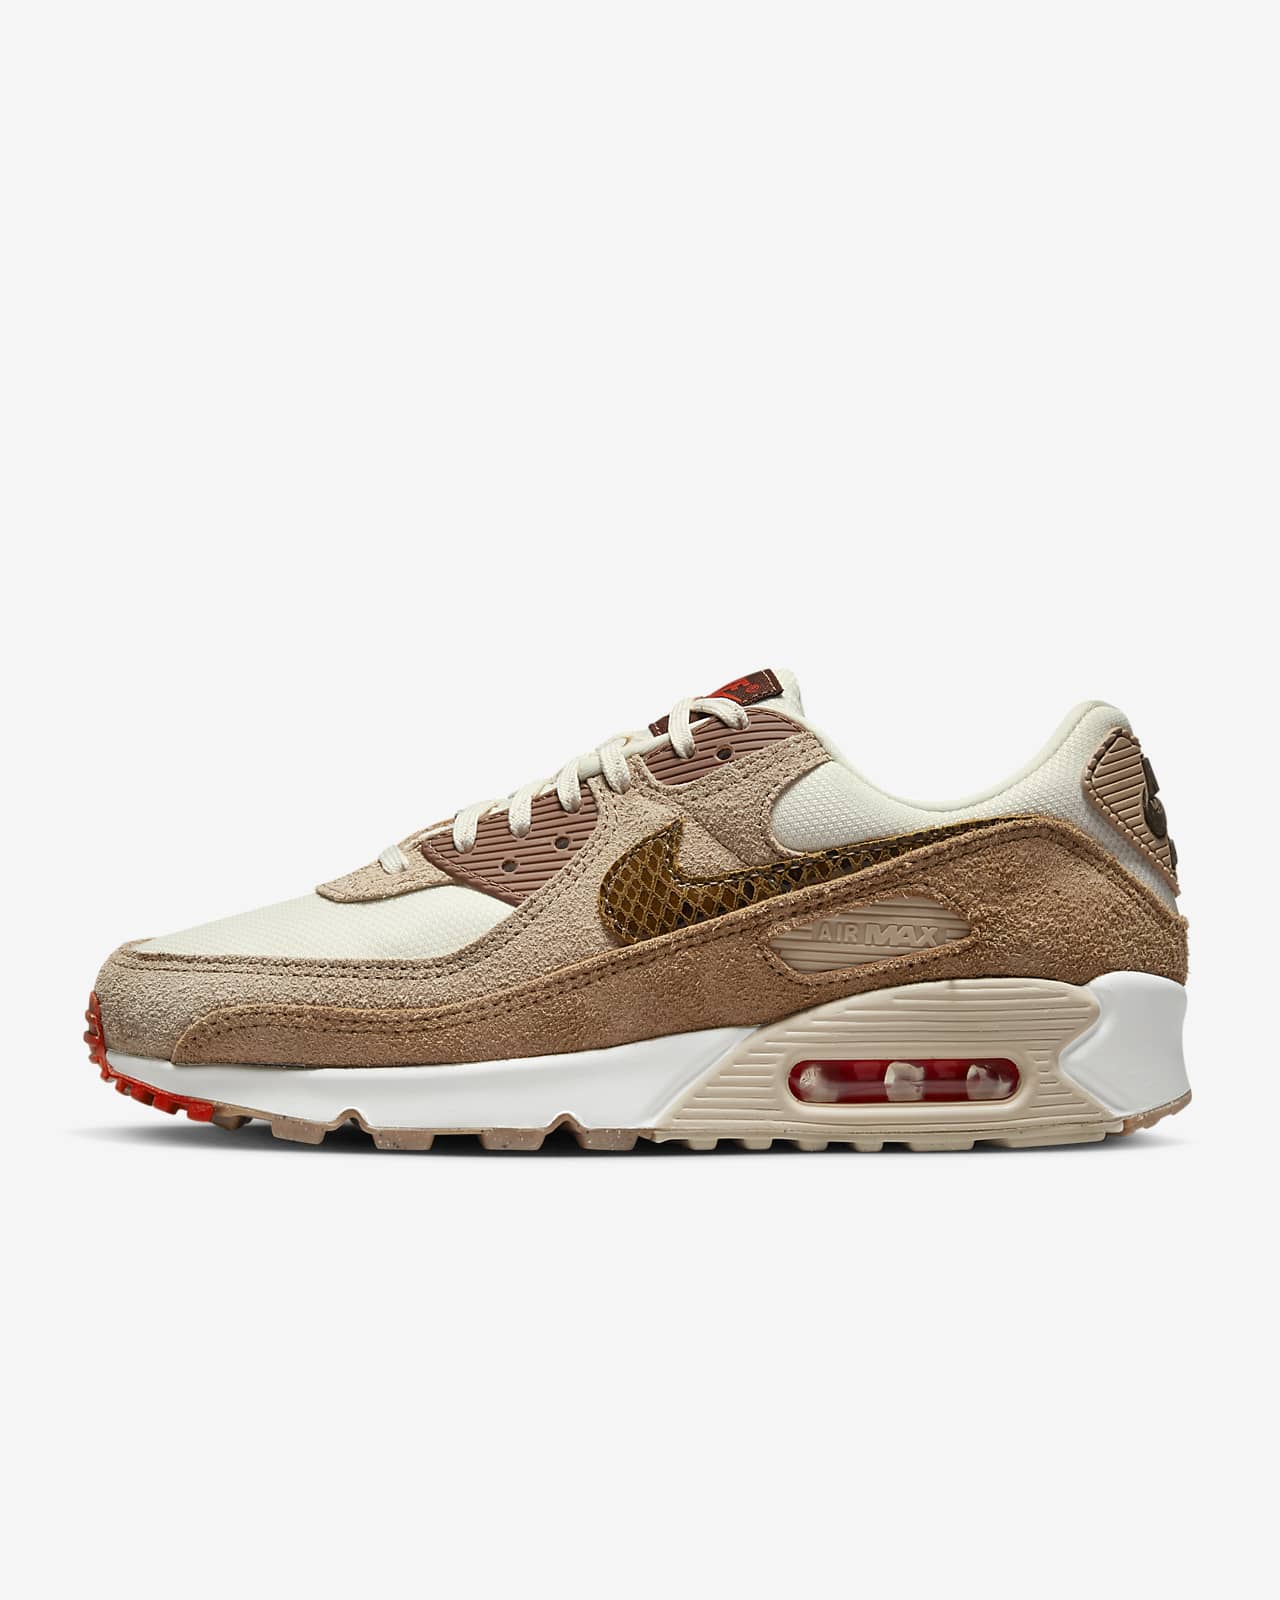 Latin Punctuality lose yourself Nike Air Max 90 AMD Women's Shoes. Nike.com